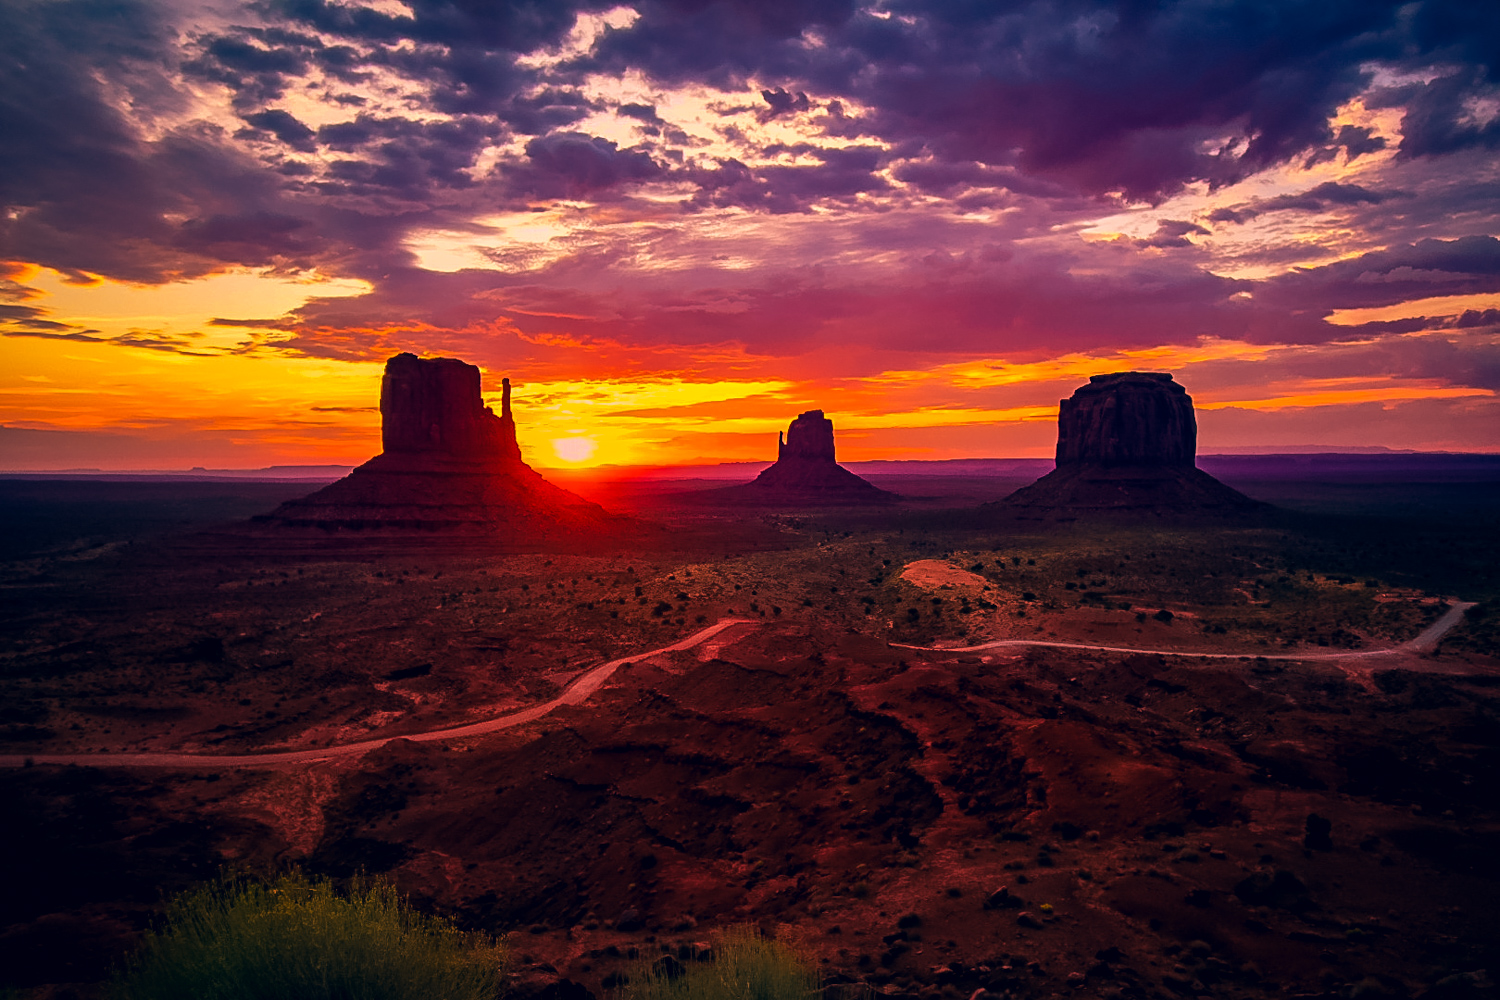 Scenic drive at sunrise at Monument Valley. Monument Valley has two famous spots: sunrise of Mitten Buttes and Merrick Buttes, and then sunset at the famous Forrest Gump movie scene location. Learn about what to expect visiting Monument Valley, and how to capture the best photos while visiting! #monumentvalley #buttes #desert